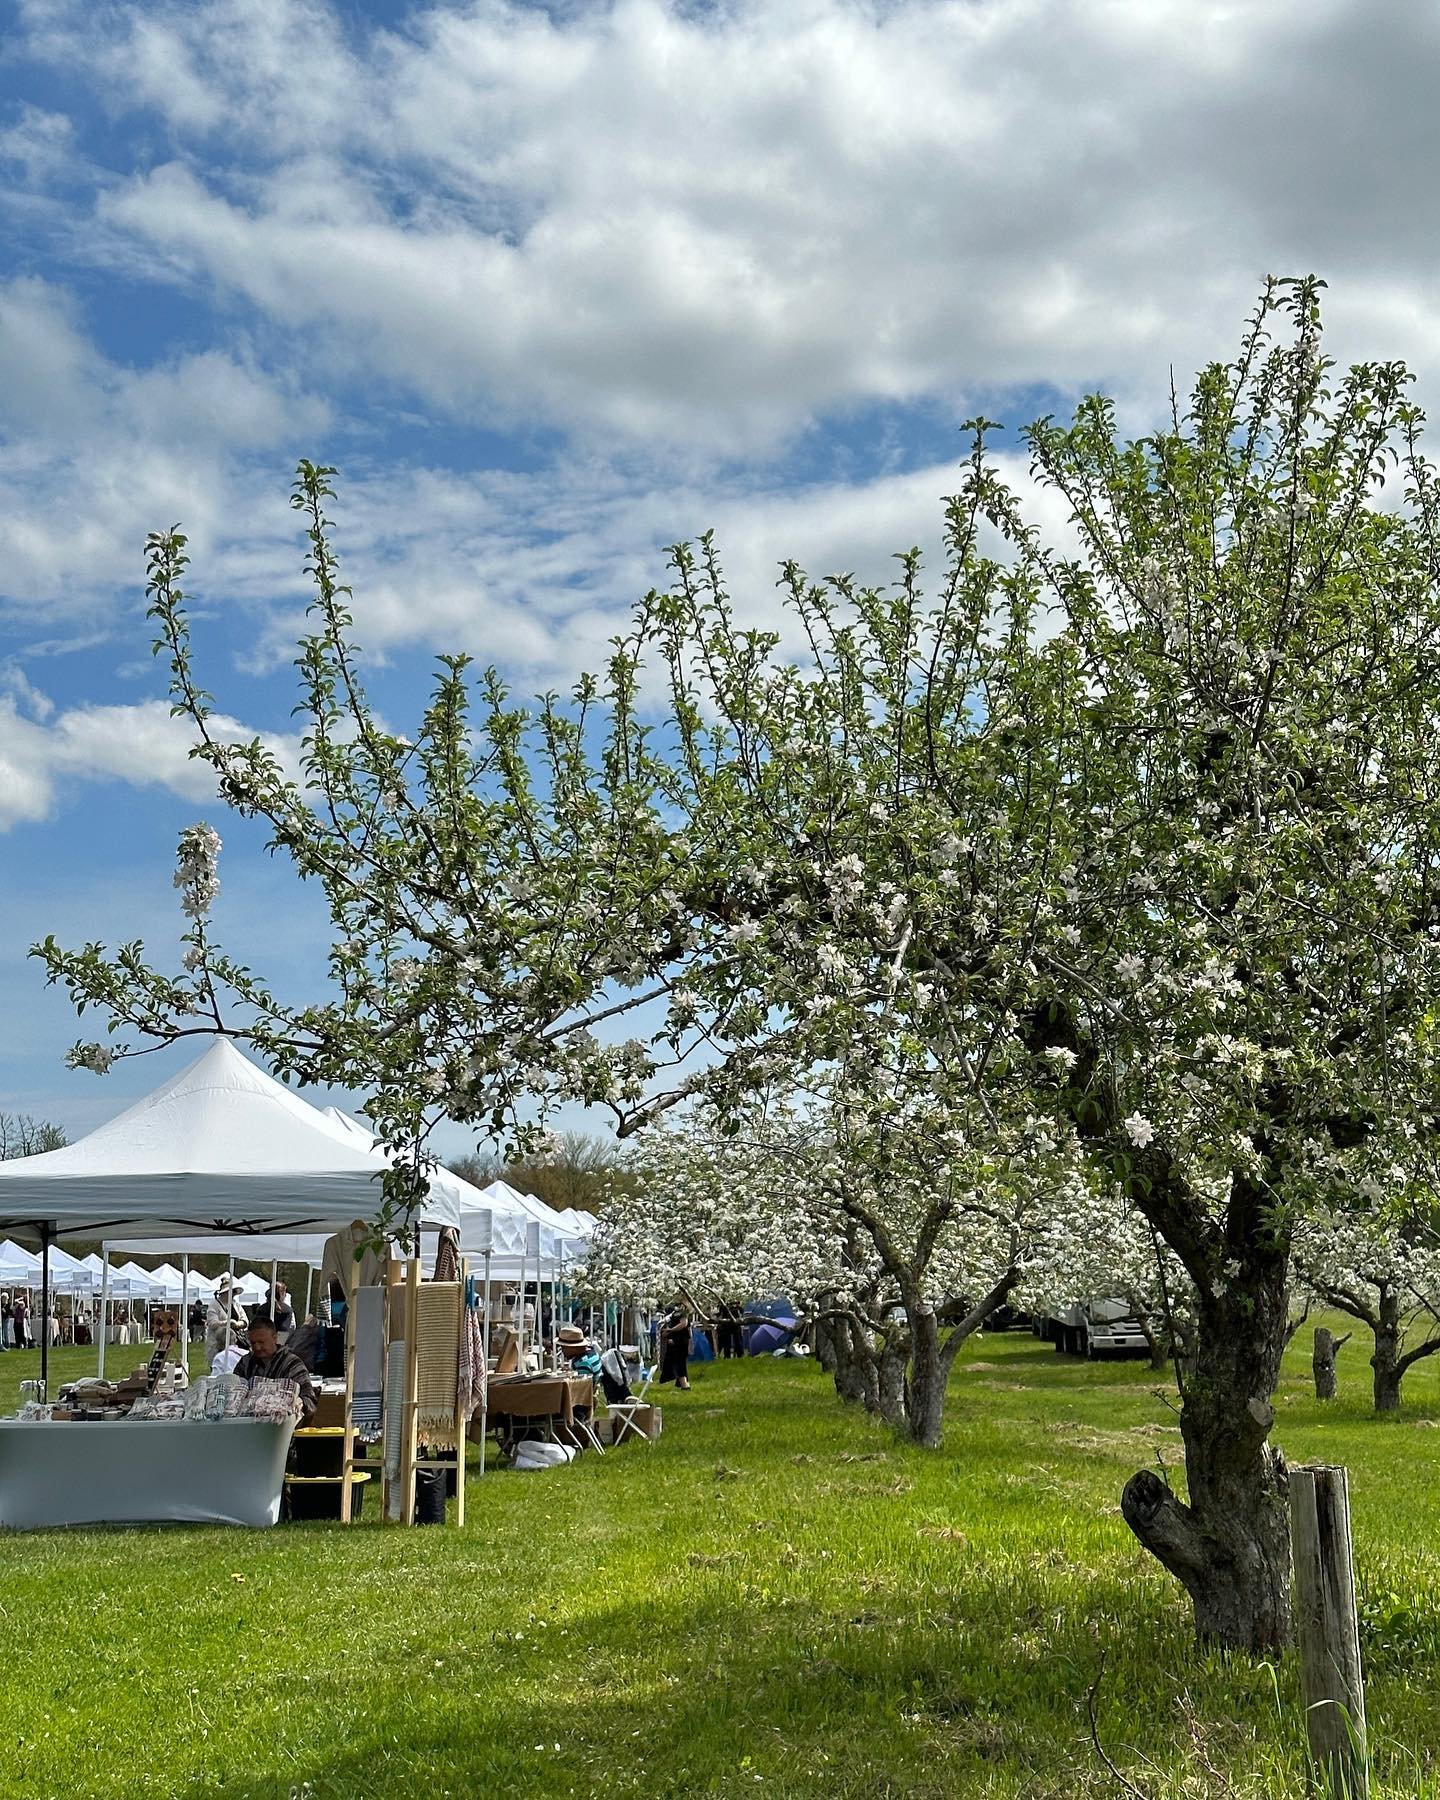 How gorgeous is the Stone Ridge Orchard? Check out Findings and tons of interesting merch to ogle and/or buy.
@stoneridgeorchard #applefarm #applesfordays #community #springhassprung